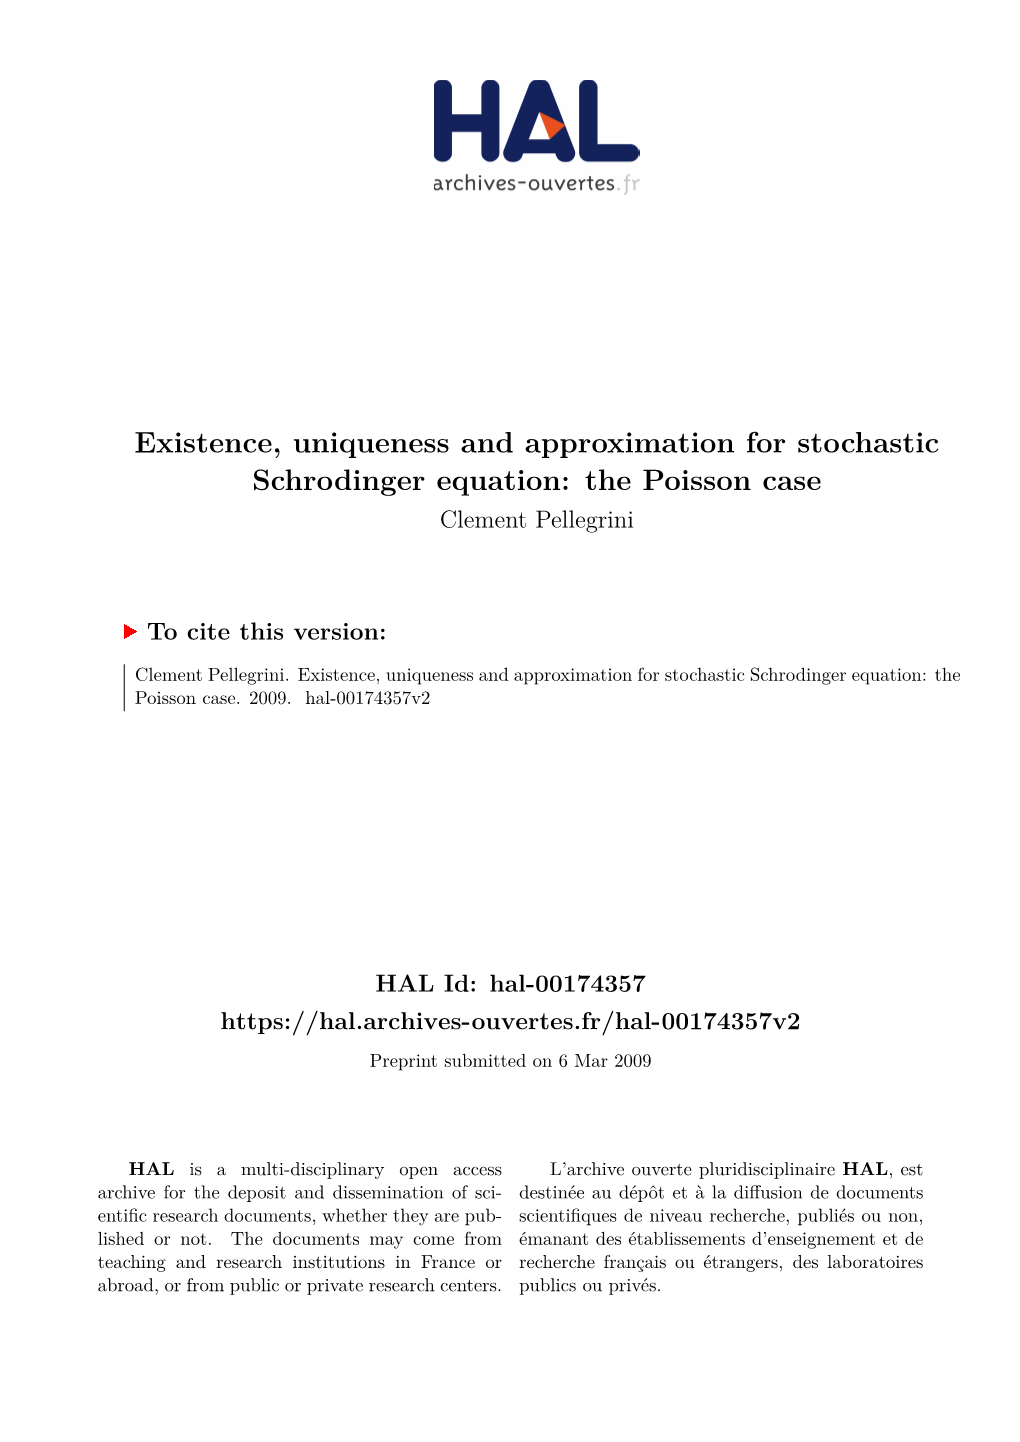 Existence, Uniqueness and Approximation for Stochastic Schrodinger Equation: the Poisson Case Clement Pellegrini